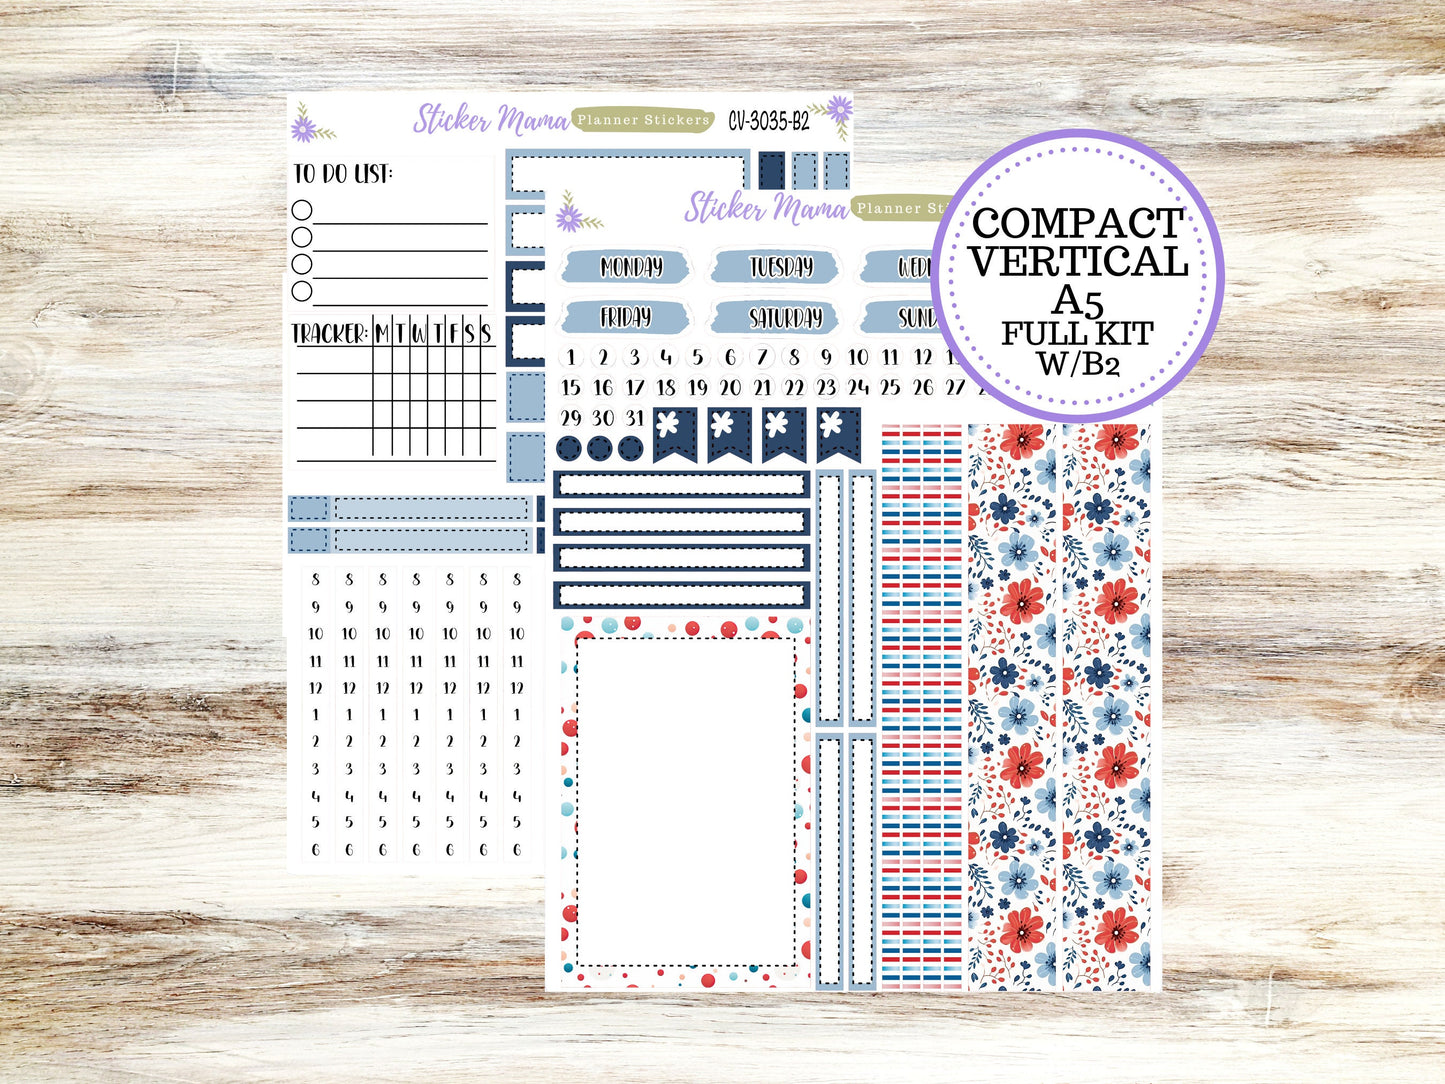 A5 COMPACT VERTICAL-Kit #3035 || American Dream Kit  - Compact Vertical - Planner Stickers - Erin Condren Compact Vertical Weekly Kit